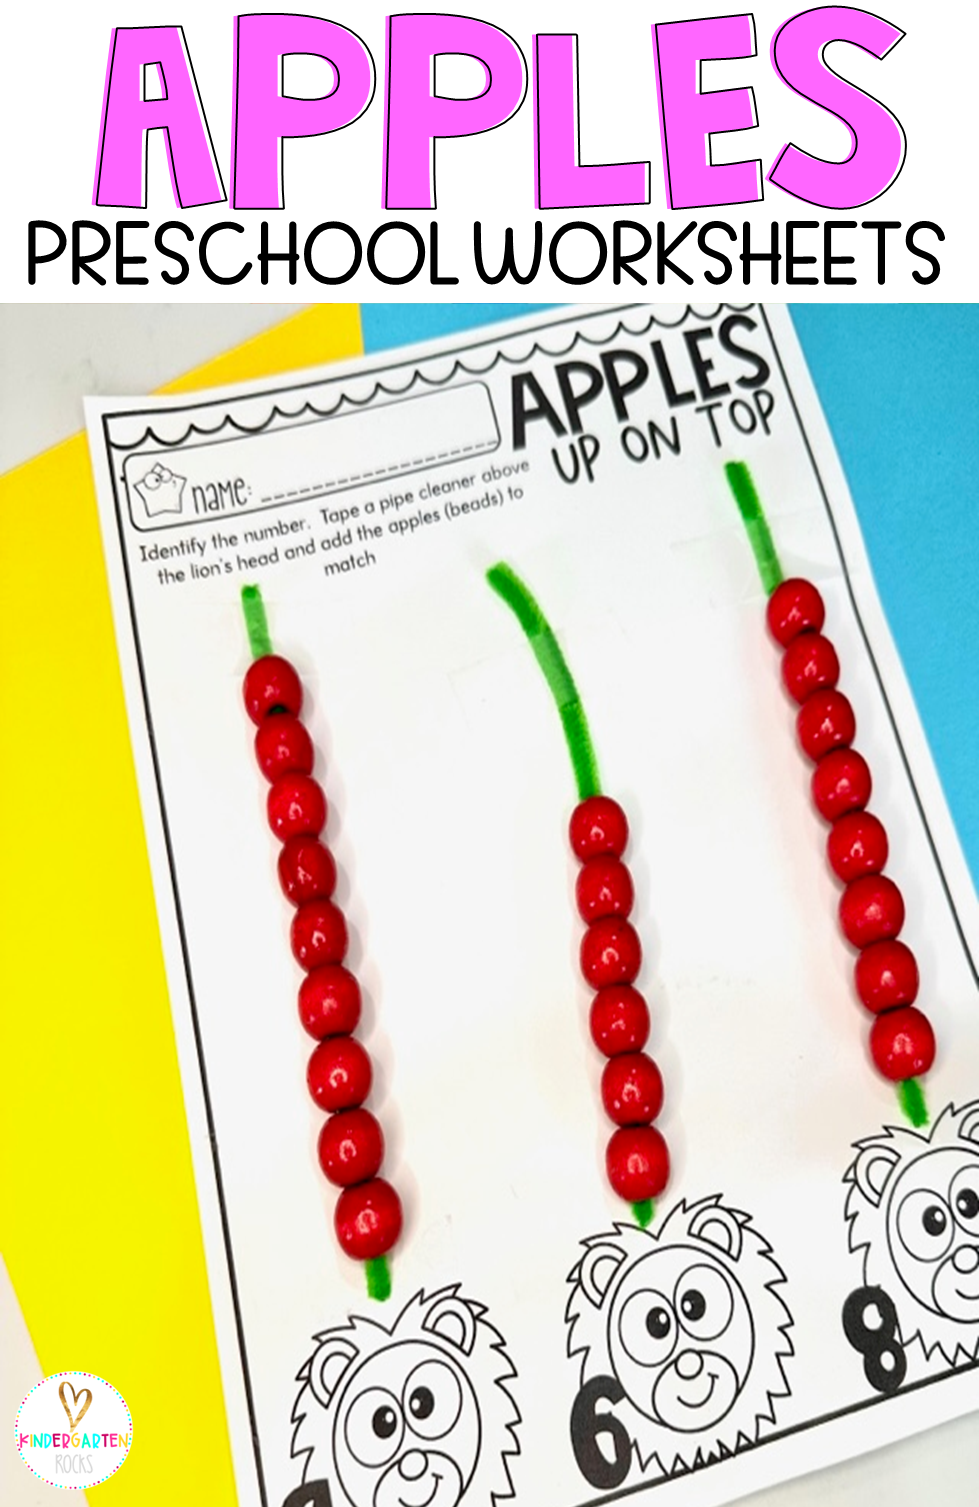 Are you looking for no-prep apple themed activities, printable and math and literacy worksheets for your preschool or kindergarten classroom? The you will love our Apple Printables and Worksheets for Preschool.